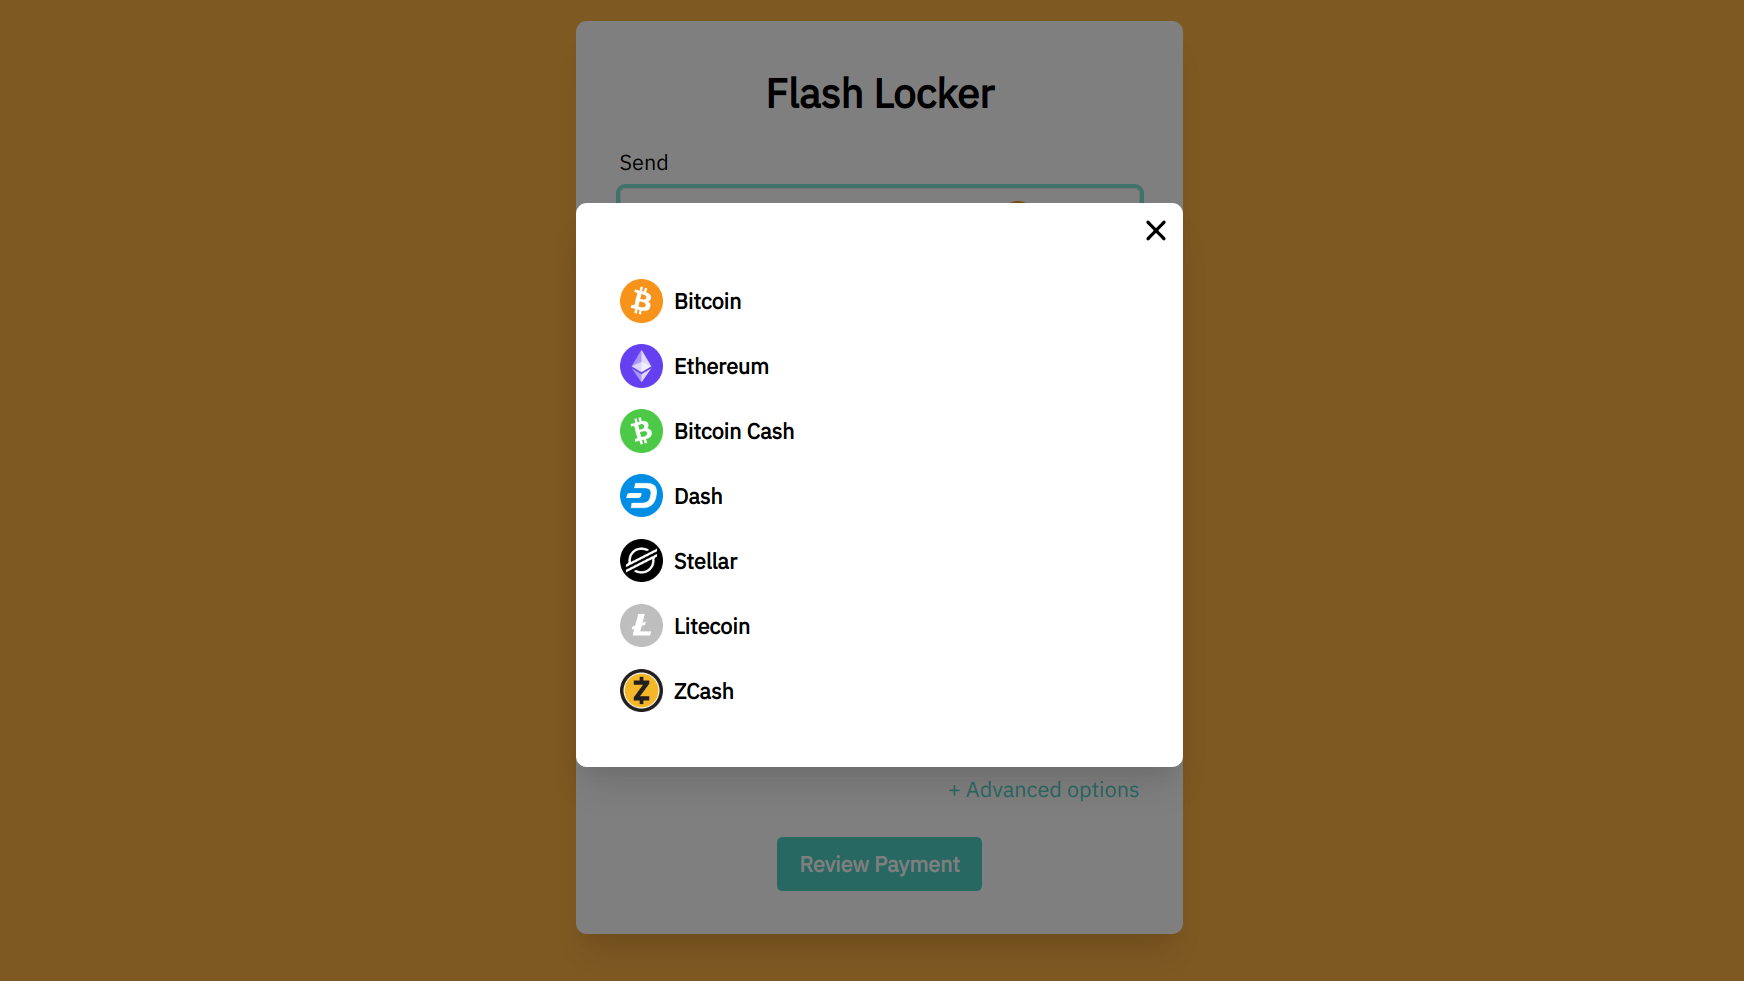 Flash Locker available assets